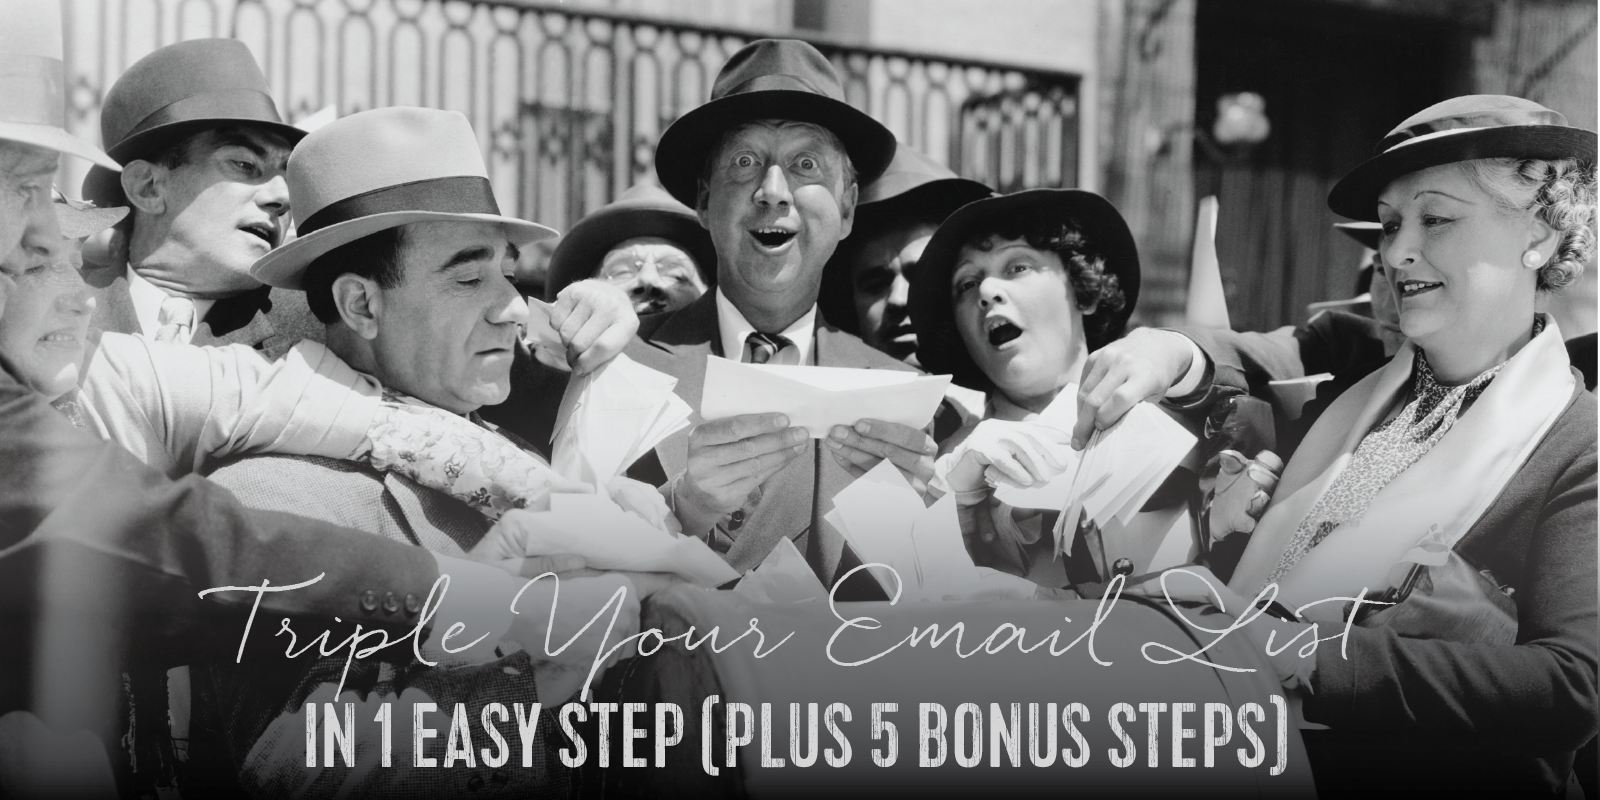 Triple your email list in 1 step